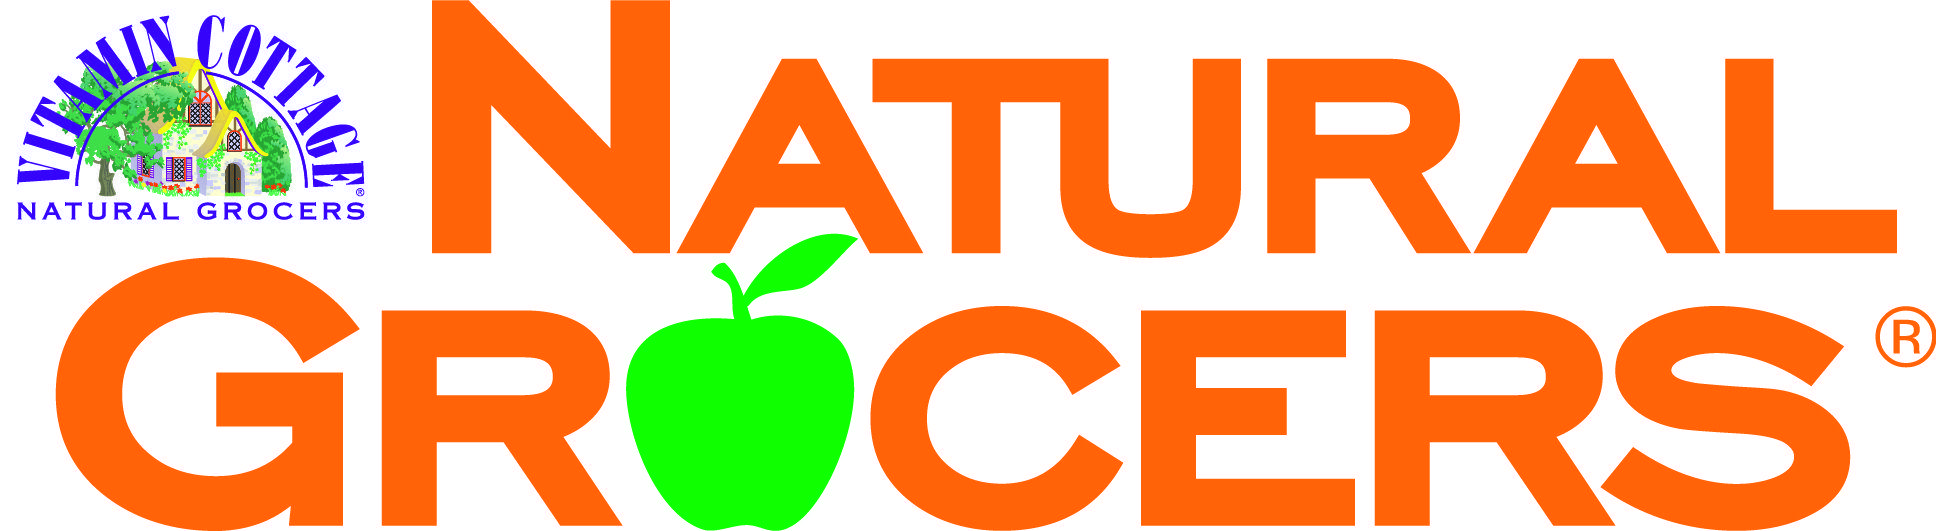 Natural Grocers Logo - Natural Grocers Parks and Recreation